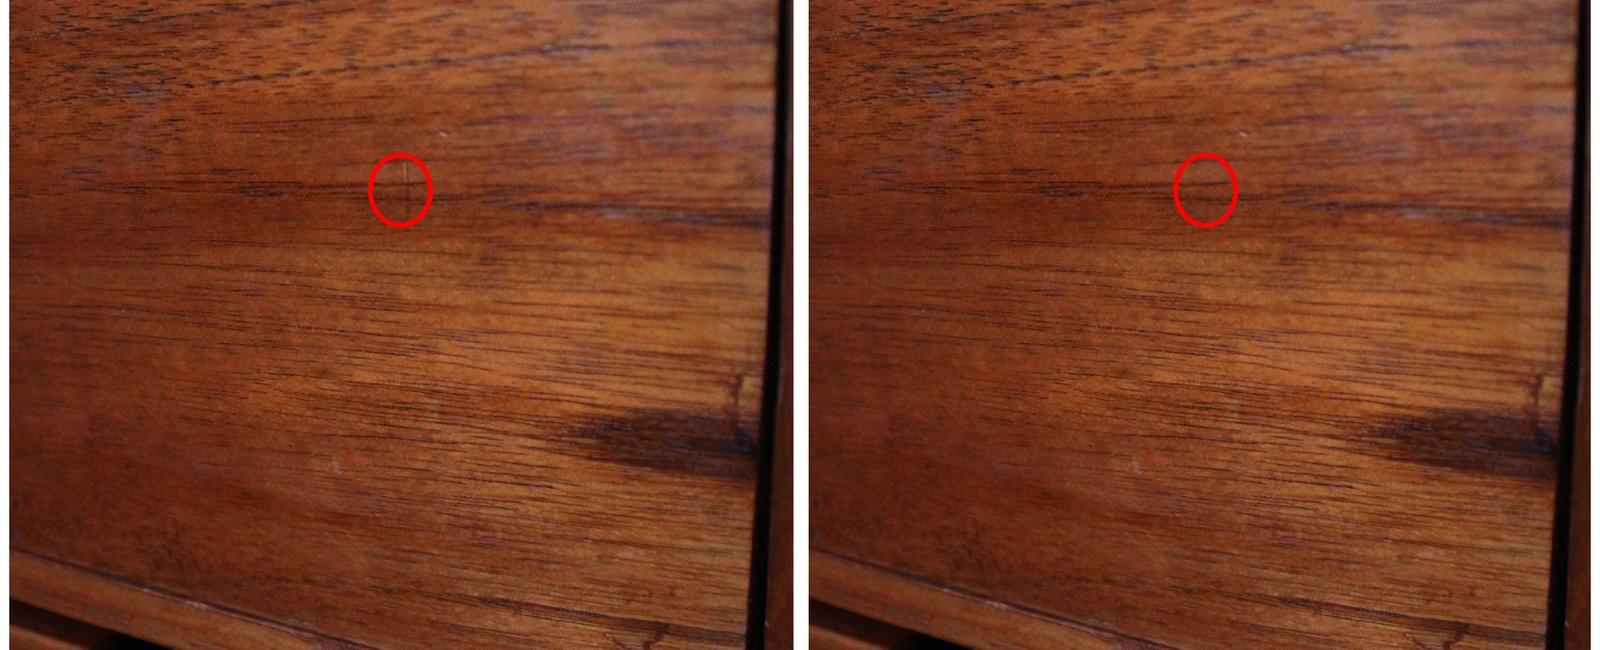 Erase dings and scrapes in wood furniture by rubbing a walnut over the problem area the oil from the nut will make those scrapes disappear